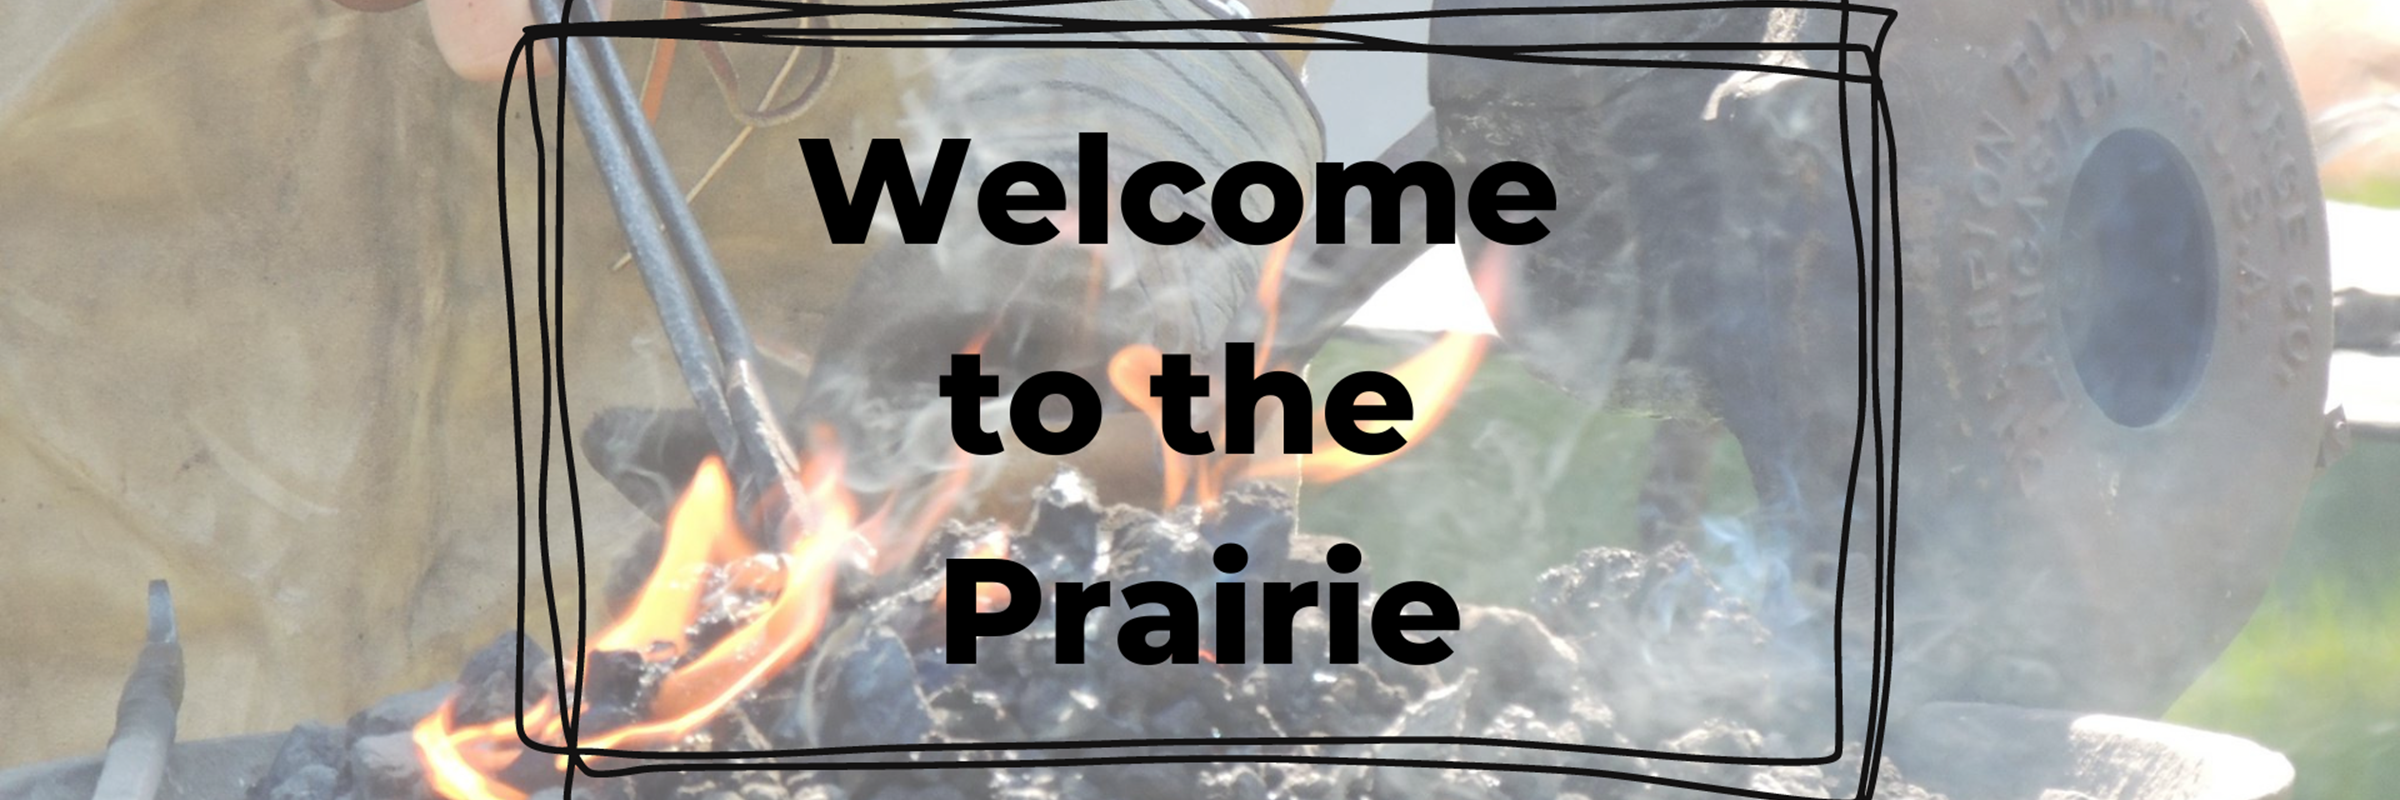 Welcome to the Prairie